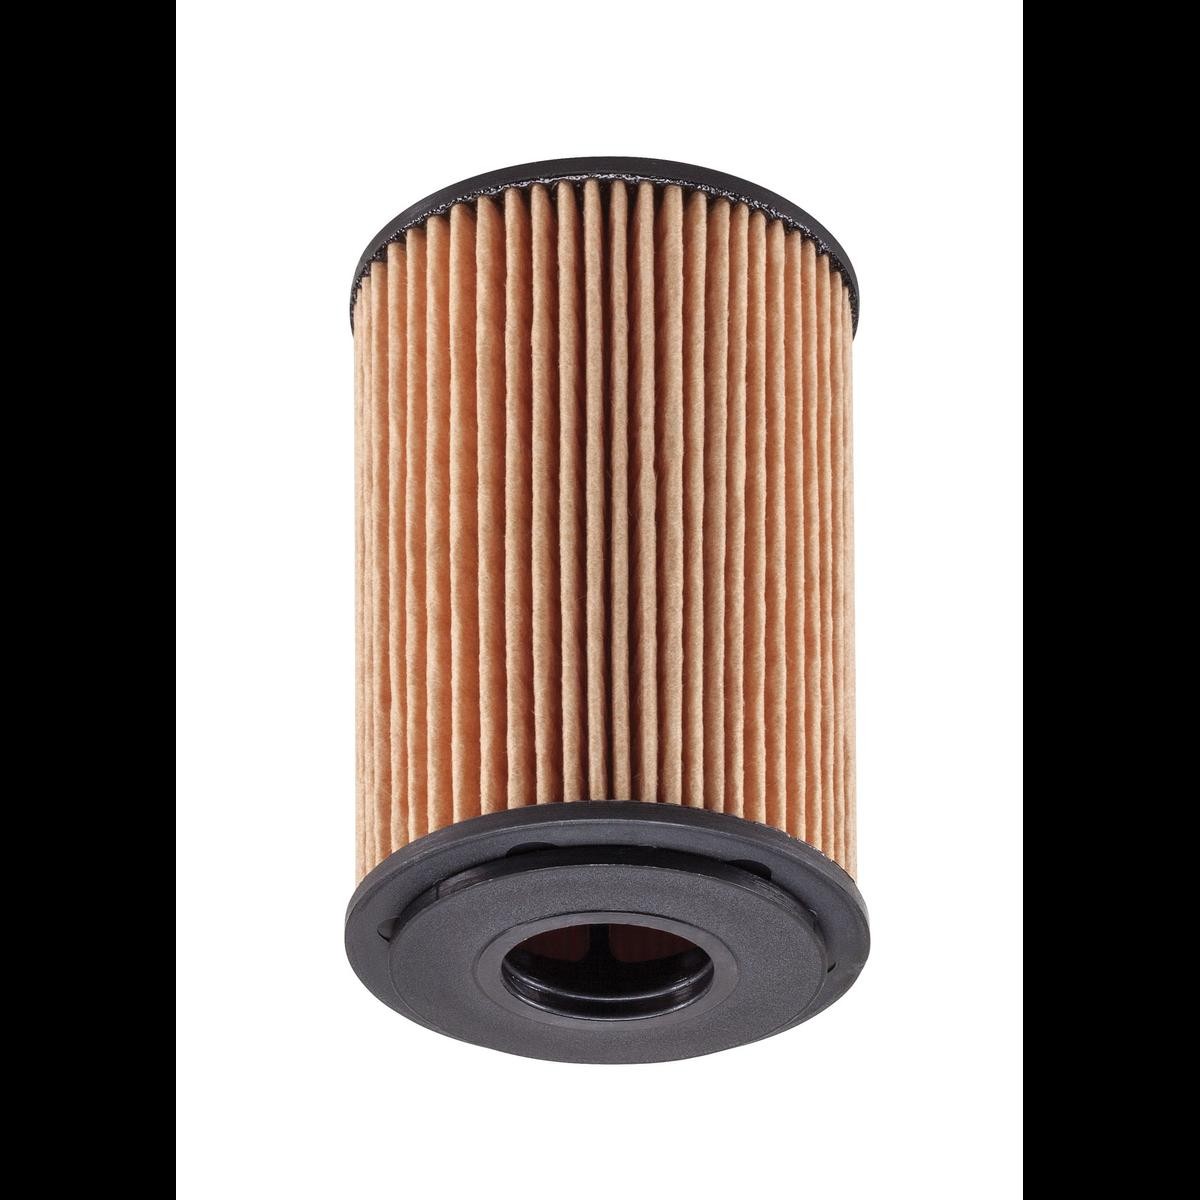 VALEO Oil filter 586544 suitable for MERCEDES-BENZ A-Class, VANEO